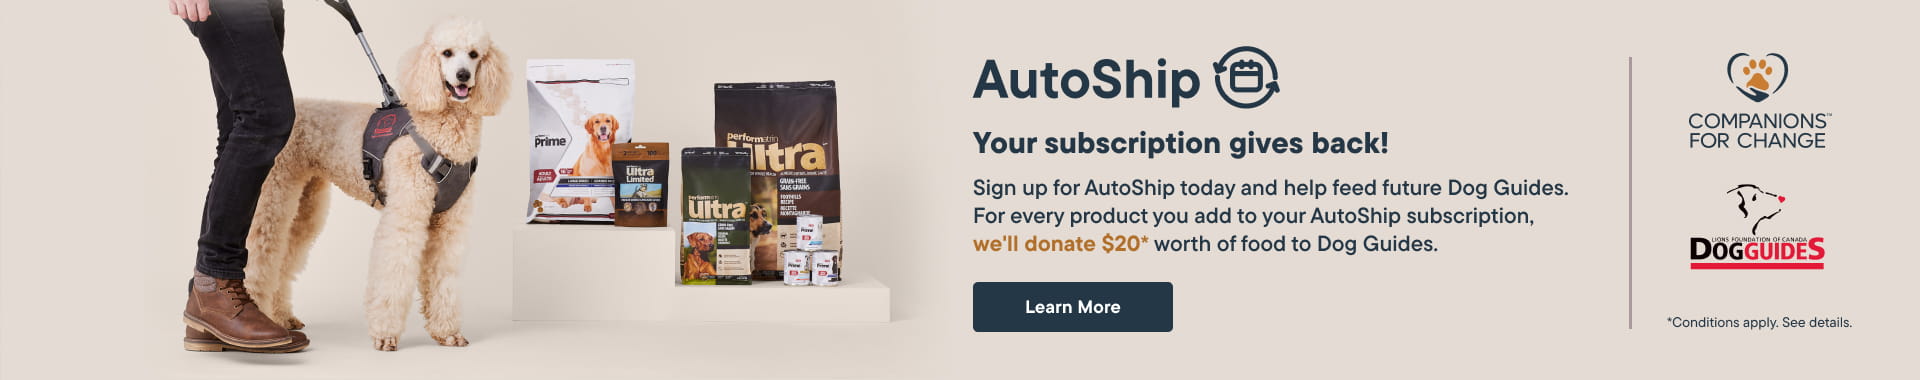 AutoShip - Your subscription gives back to Dog Guides! Learn More